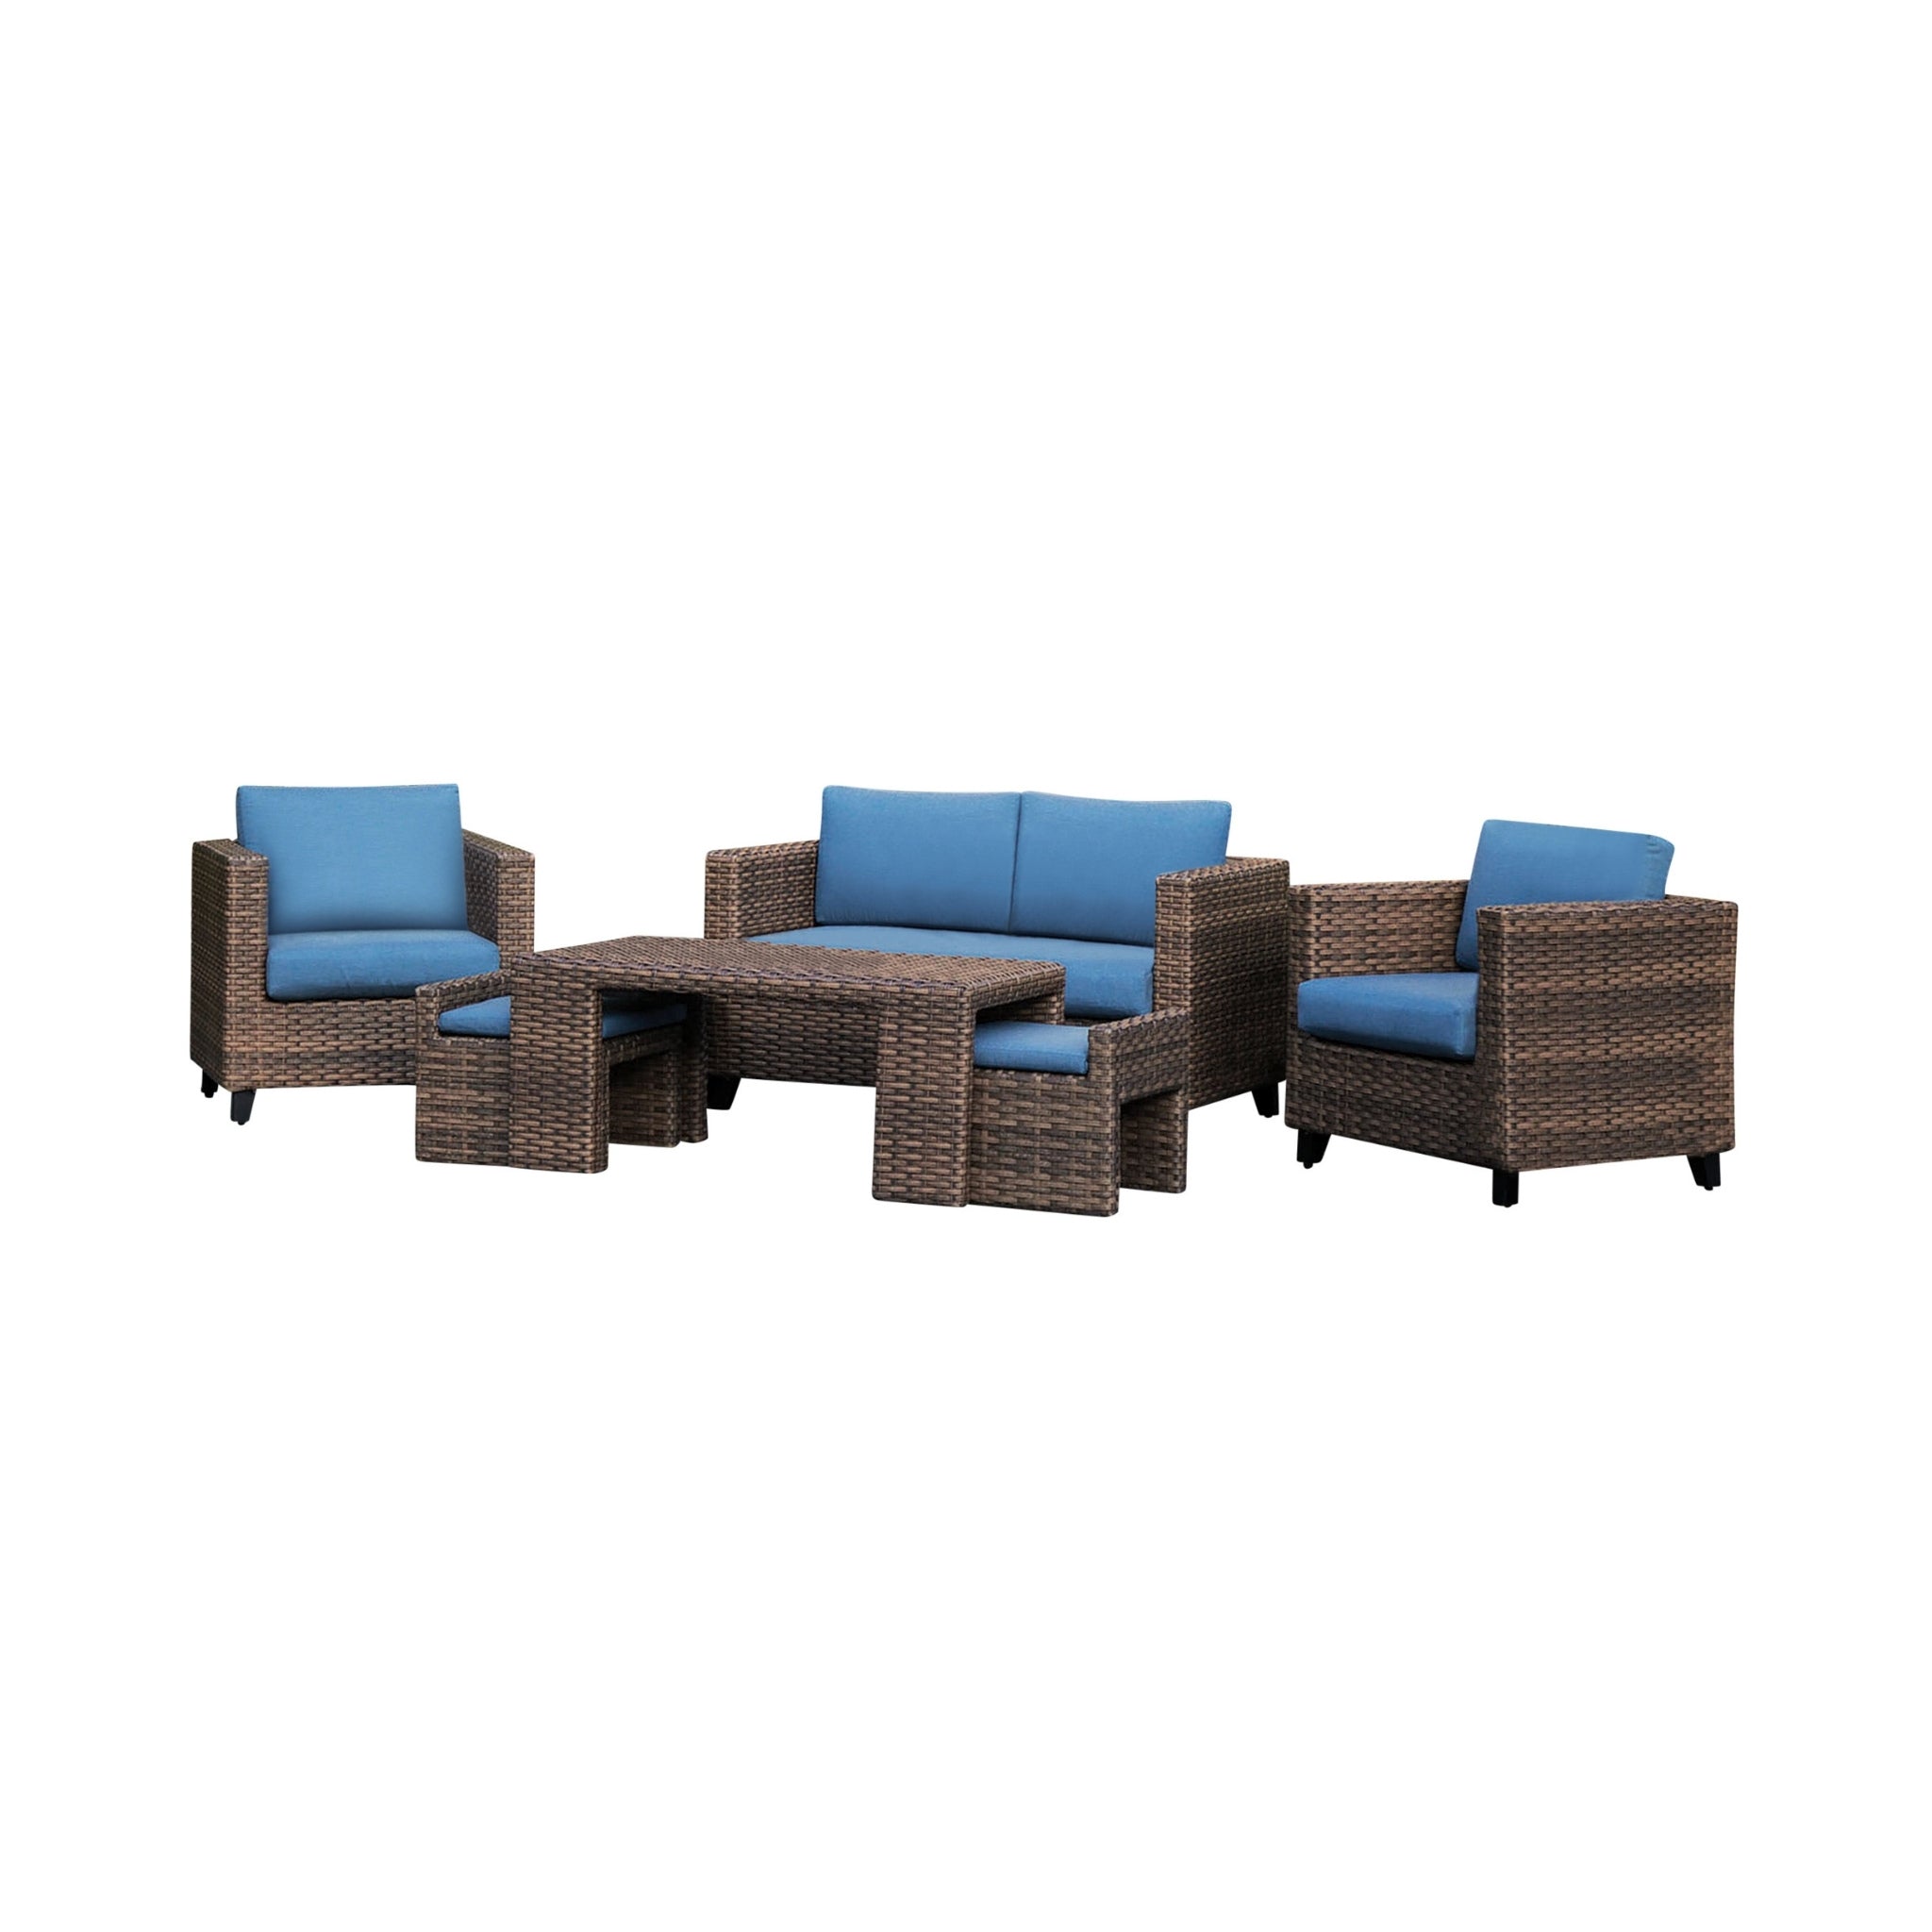 Bampton 6pc Chat and Dine Outdoor Seating Set